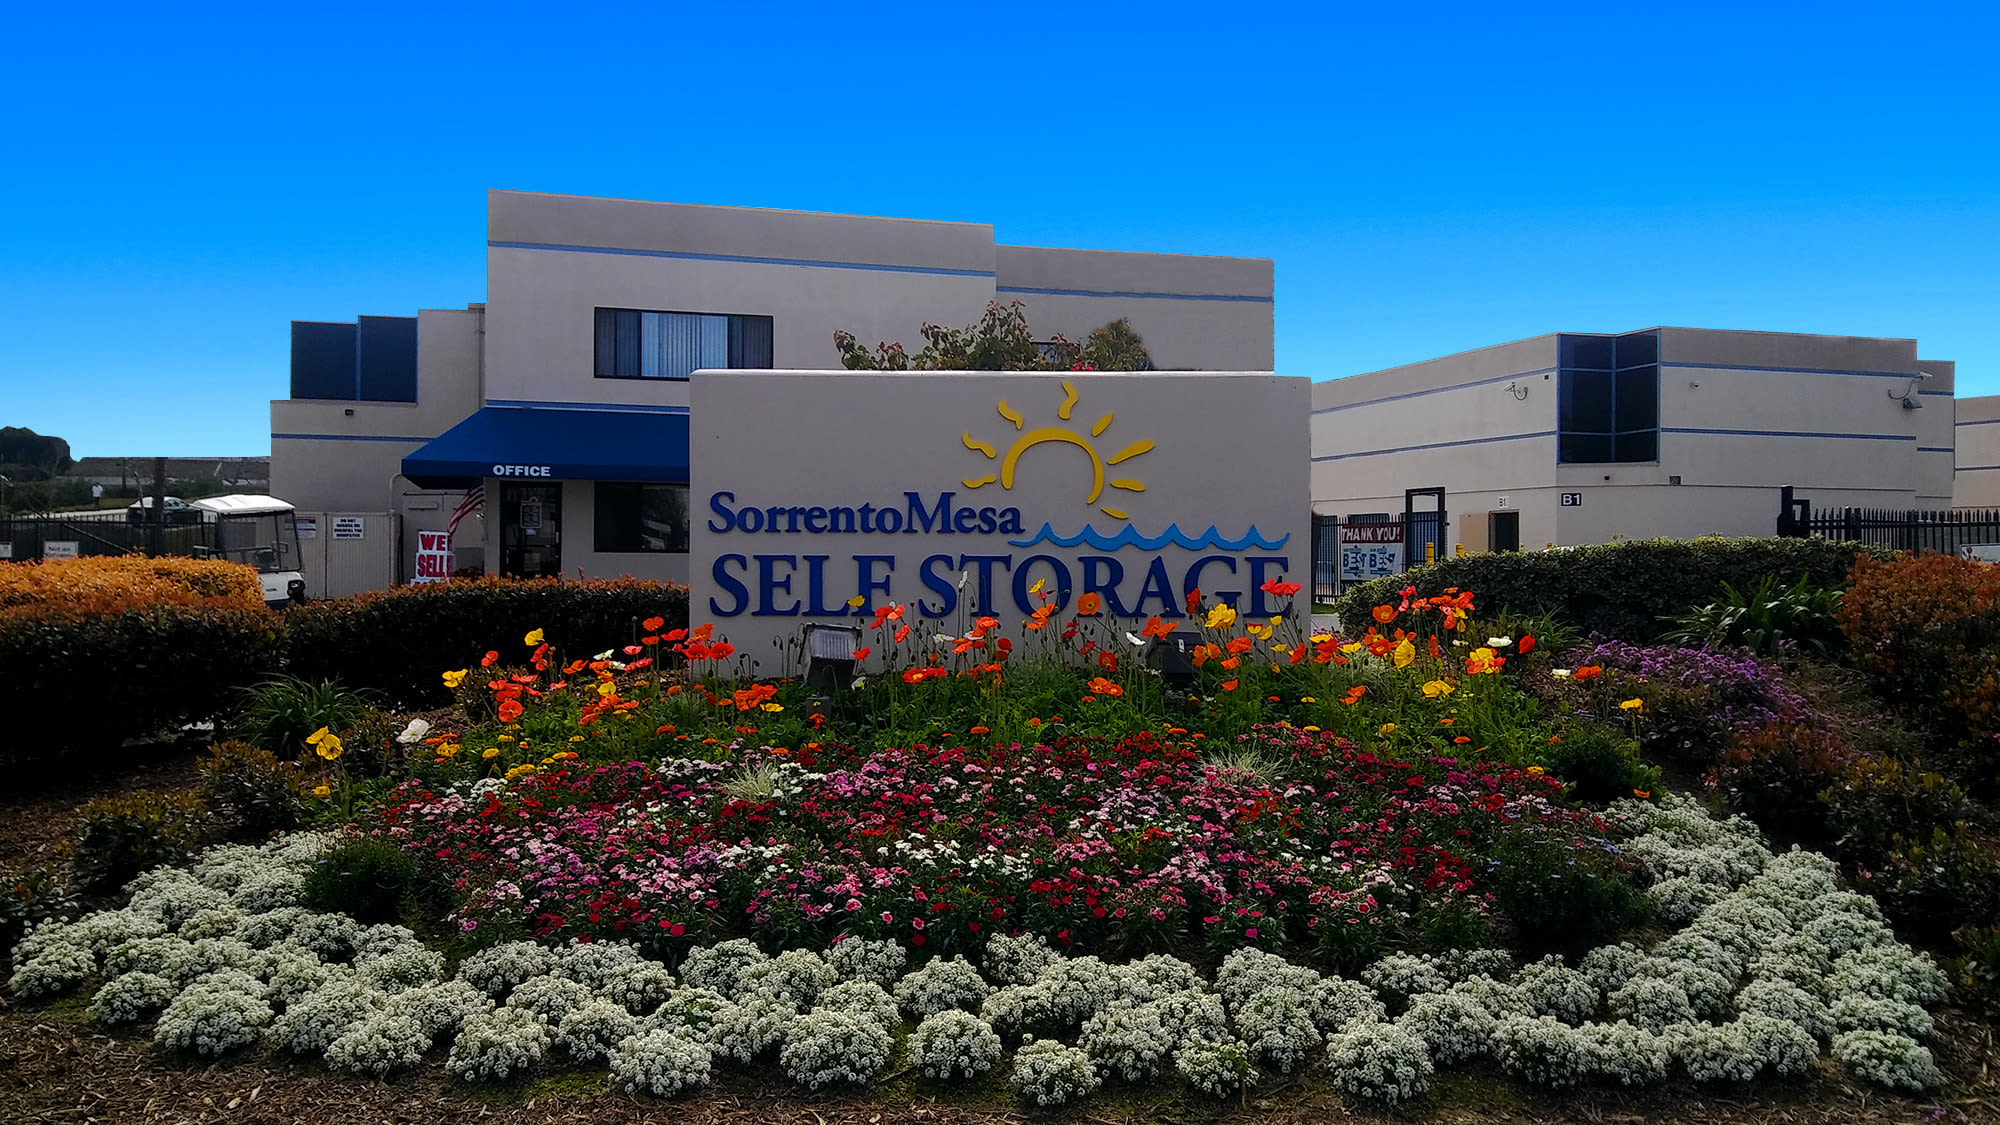 The facility grounds at Sorrento Mesa Self Storage in San Diego, CA